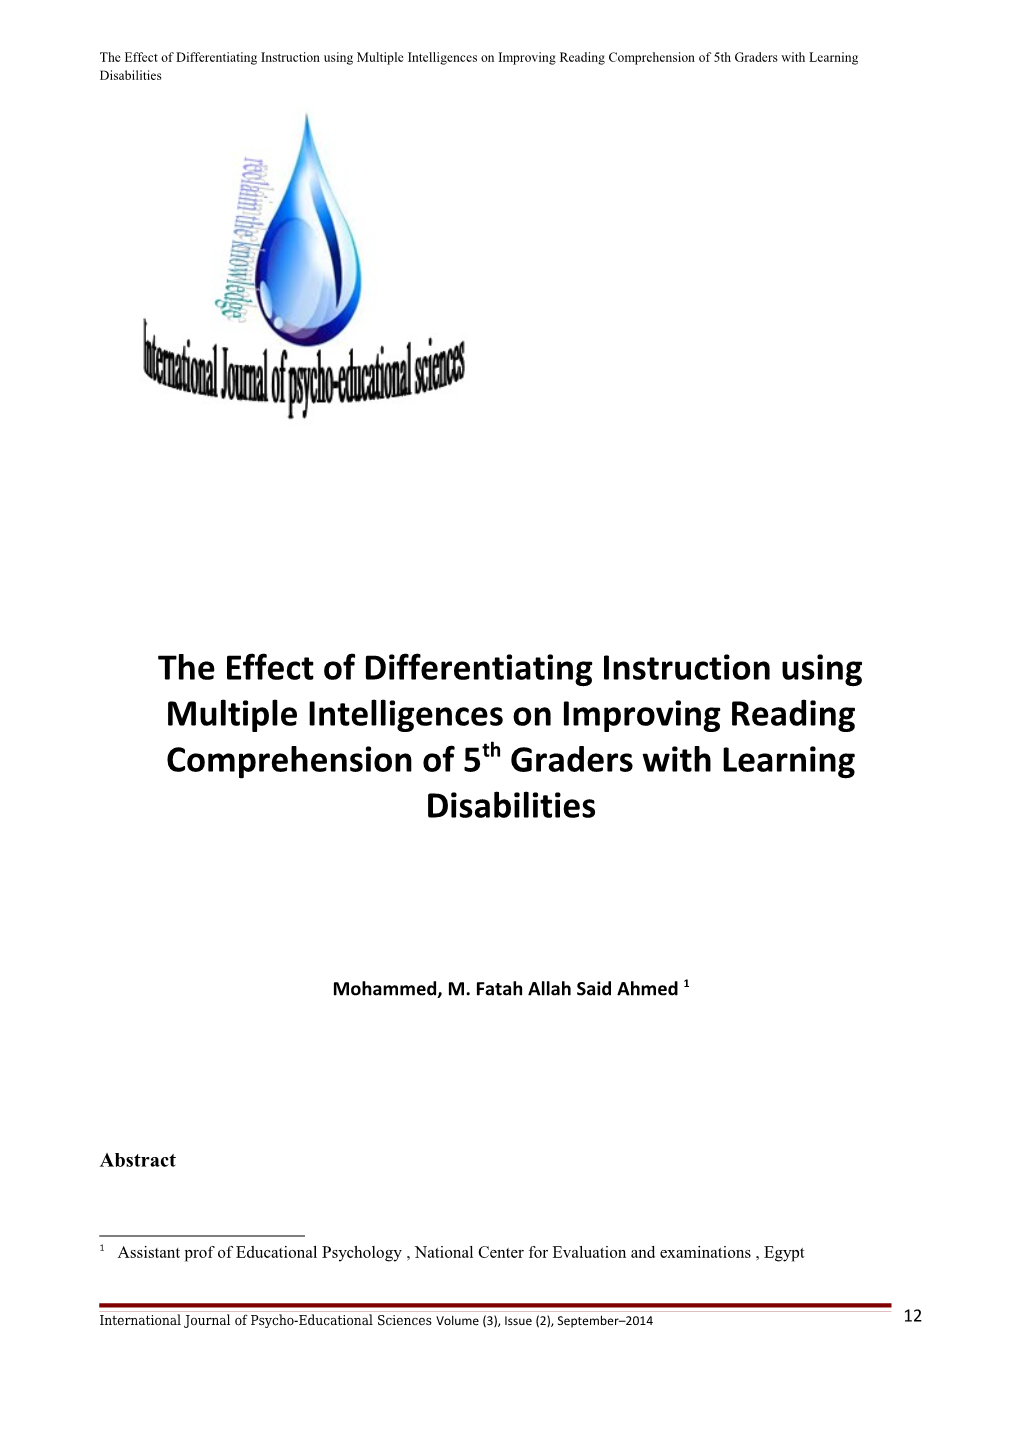 The Effect of Differentiating Instruction Using Multiple Intelligences on Improving Reading